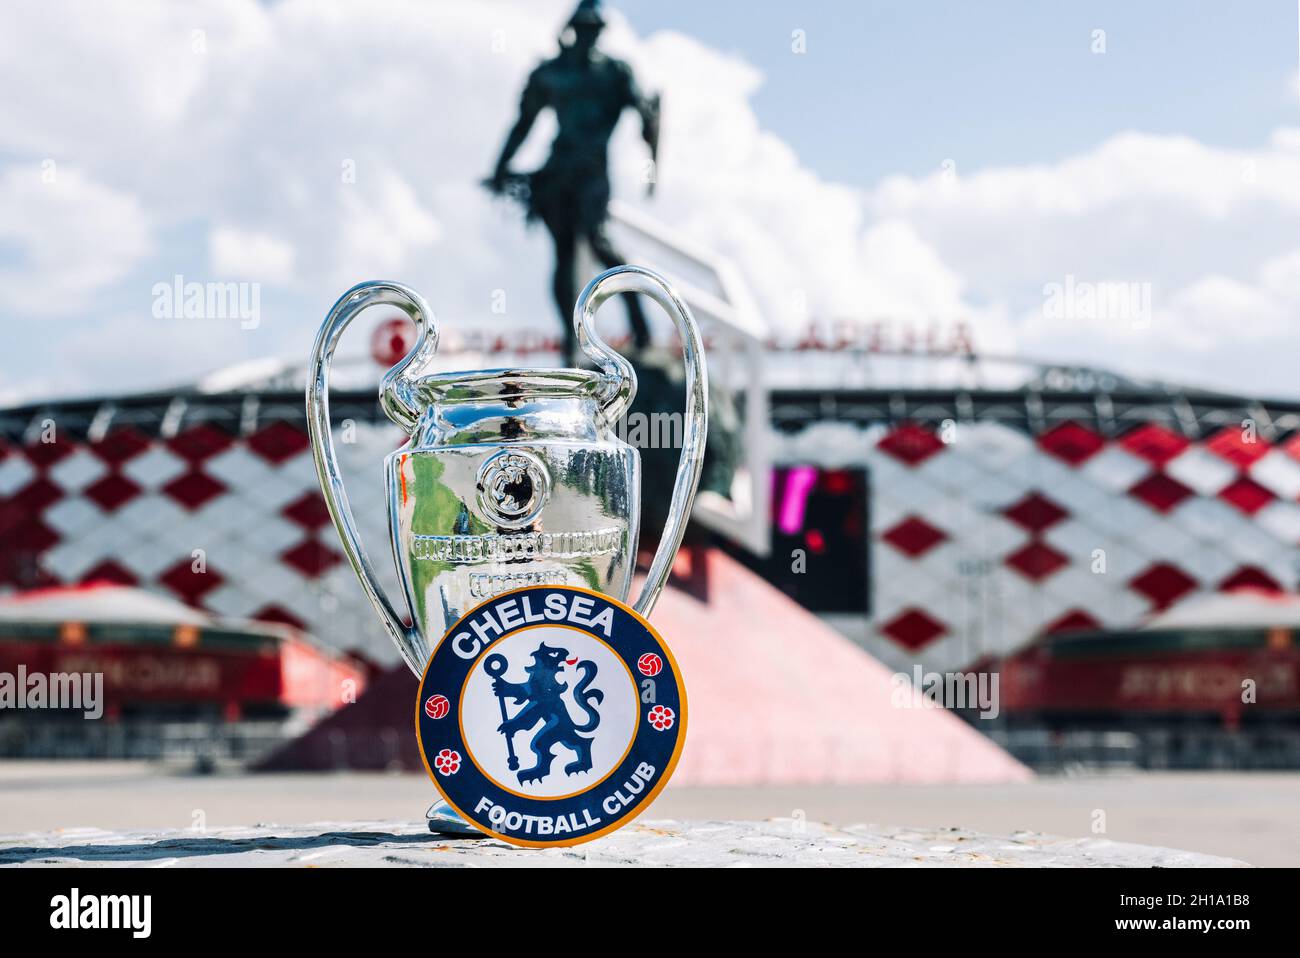 June 14 21 London Uk Chelsea F C Football Club Emblem And The Uefa Champions League Cup Against The Backdrop Of A Modern Stadium Stock Photo Alamy